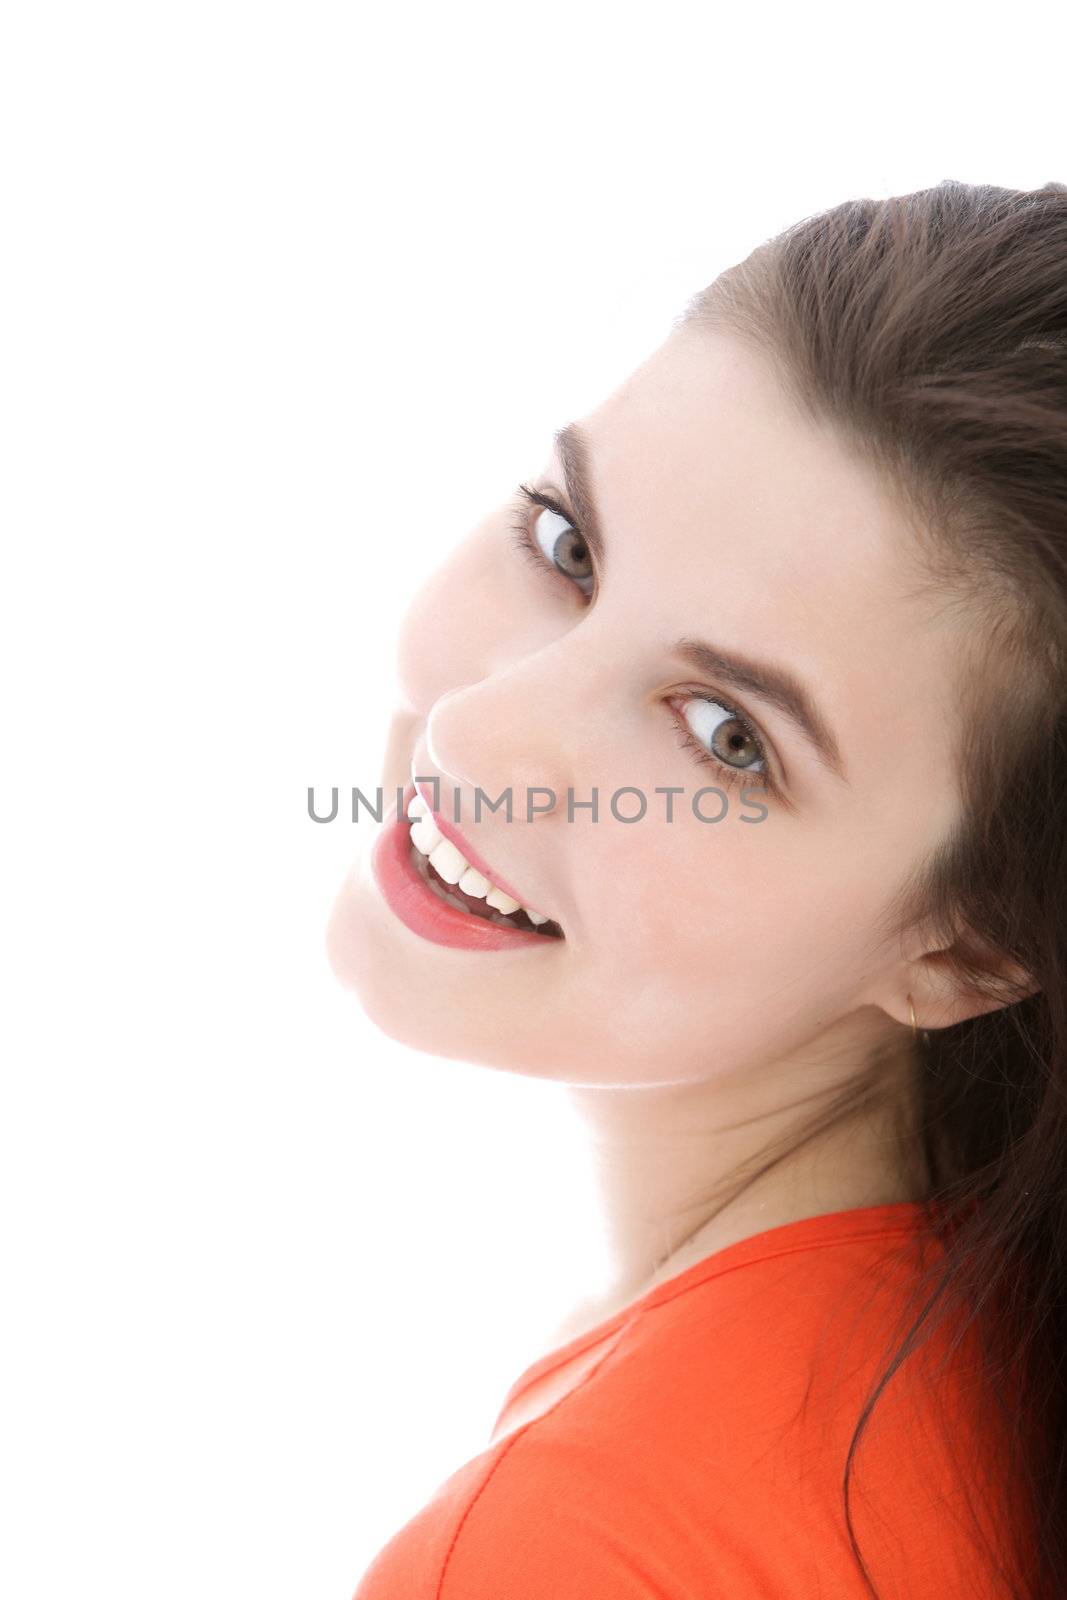 Cropped view partial head portrait of a smiling woman looking back at the lens isolated on white